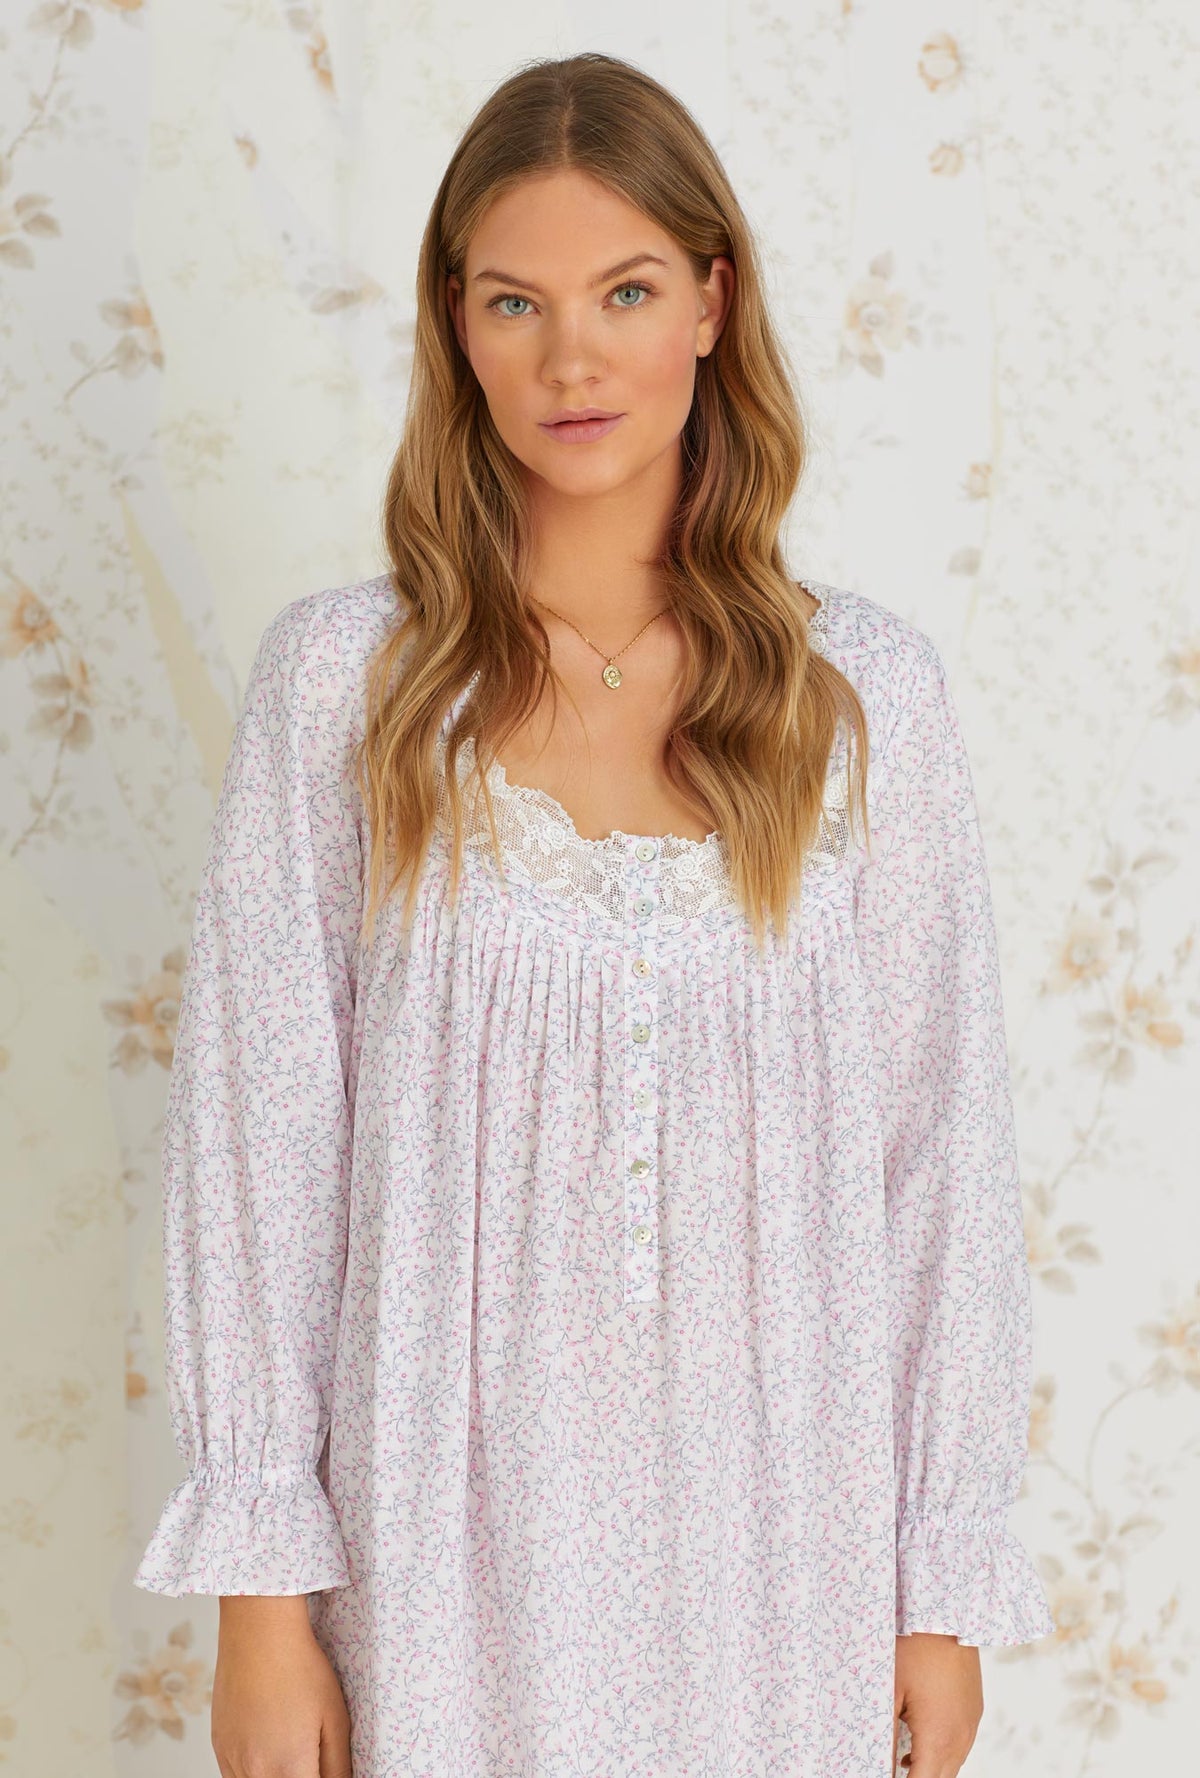 A lady wearing white long sleeve cotton nightgown with baby rosette print.